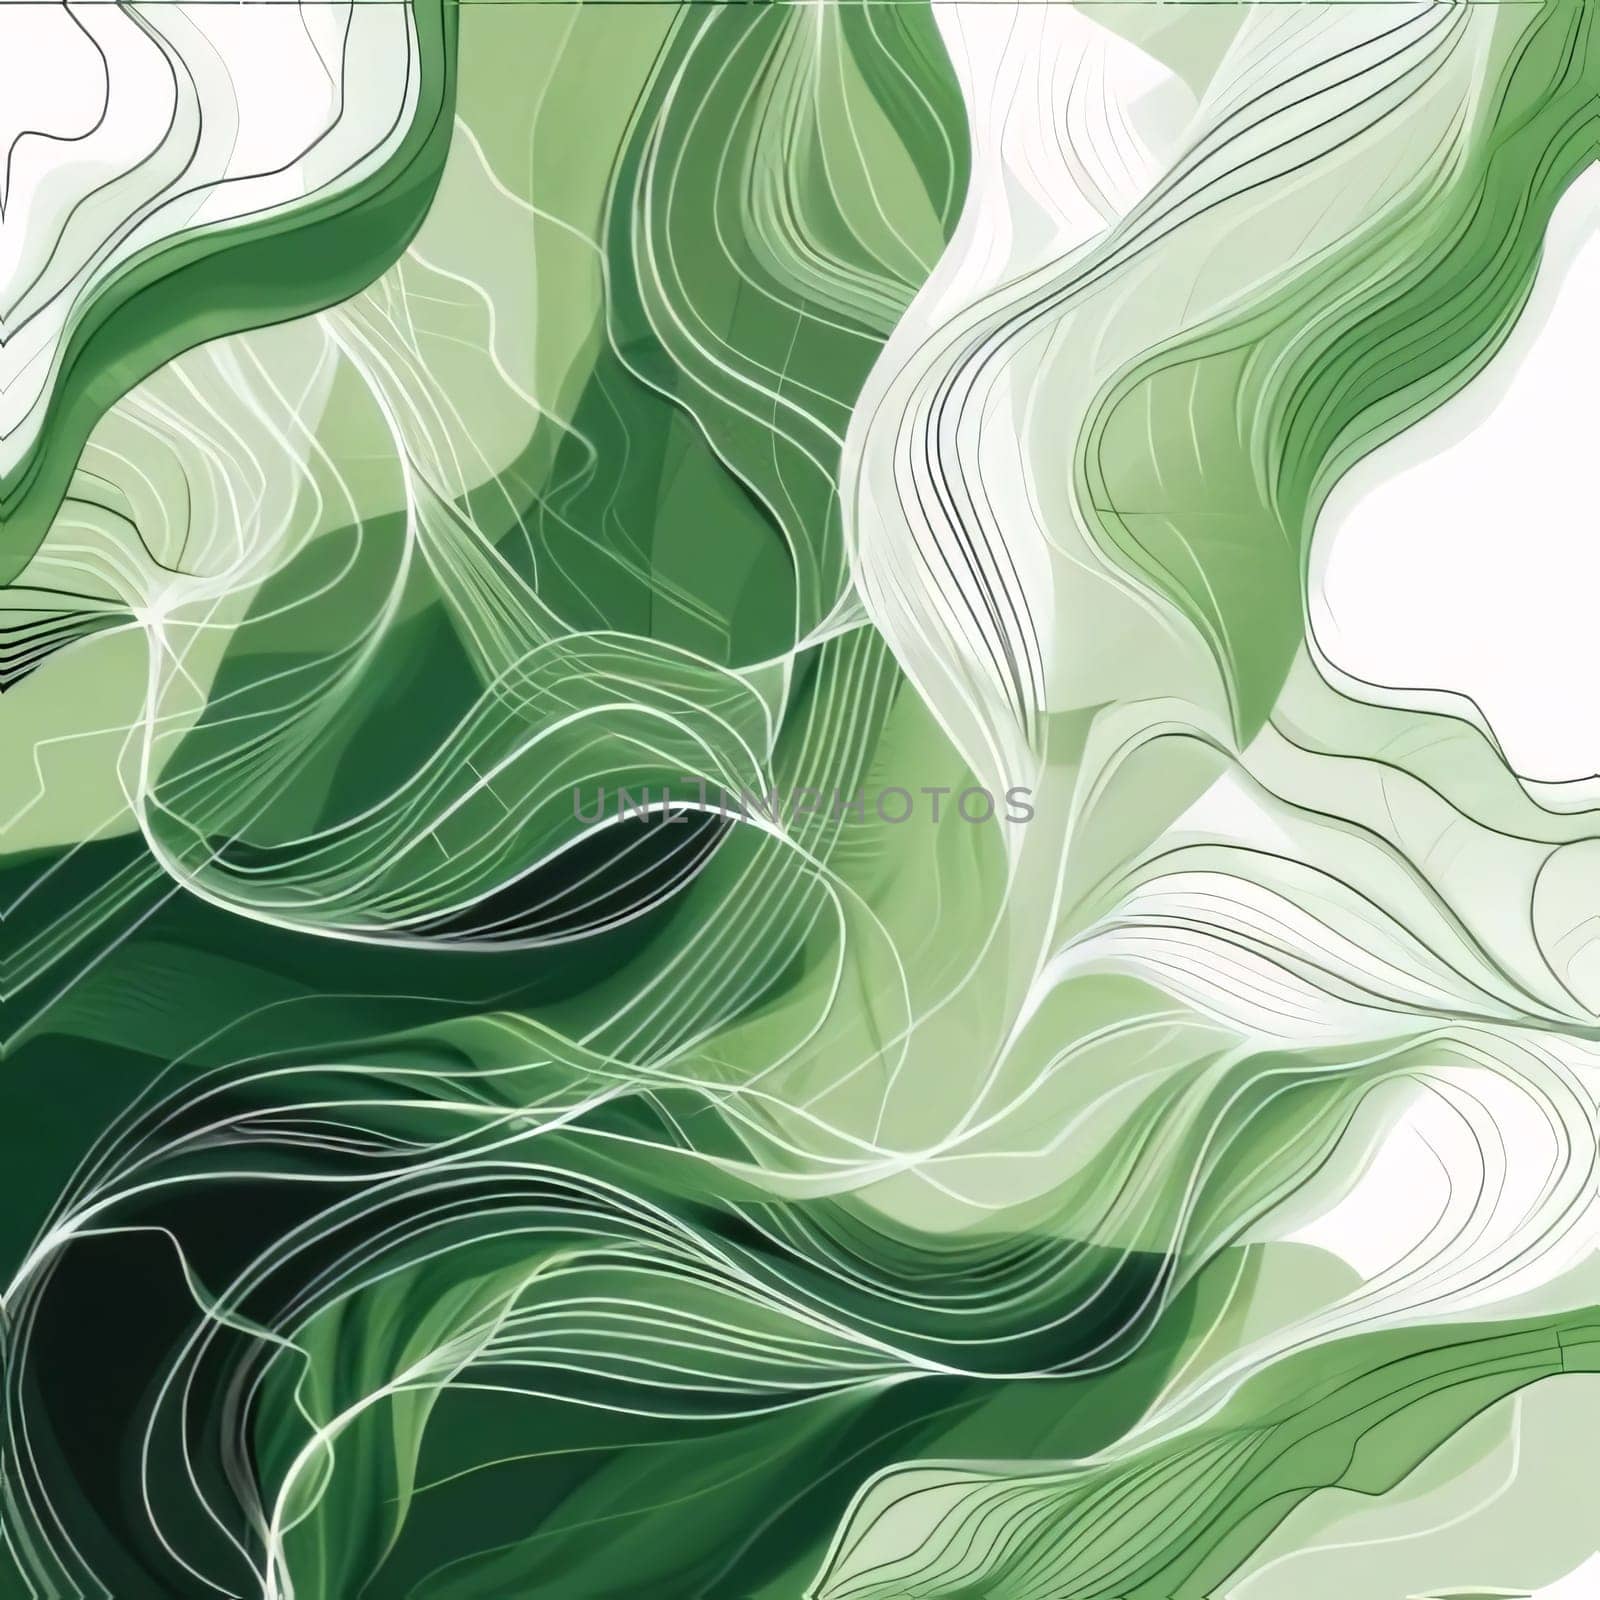 Abstract background design: Abstract green background with lines and waves. Vector illustration. Eps 10